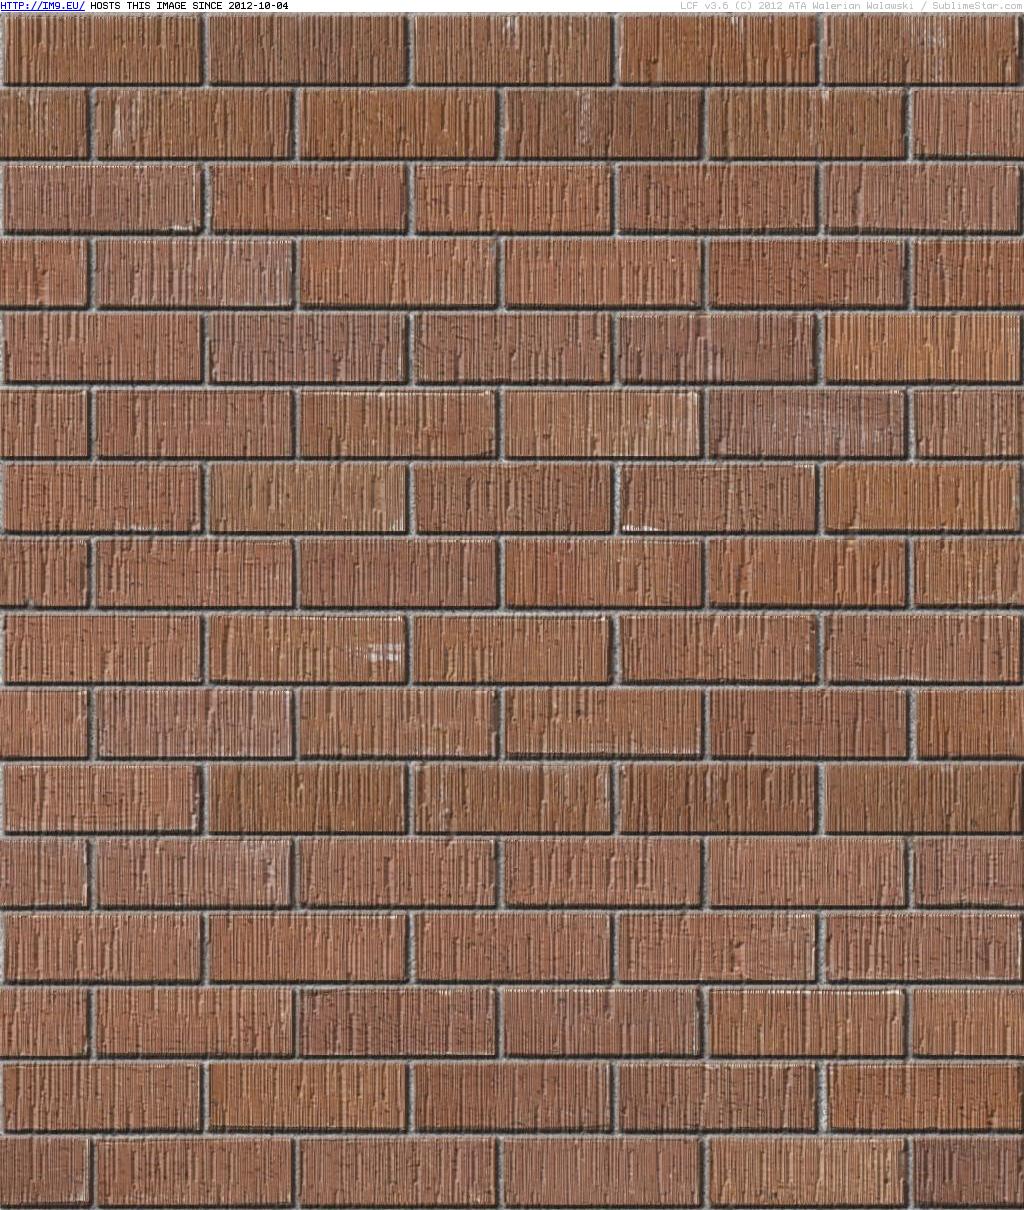 Brick wall texture 4 (in Brick walls textures and wallpapers)